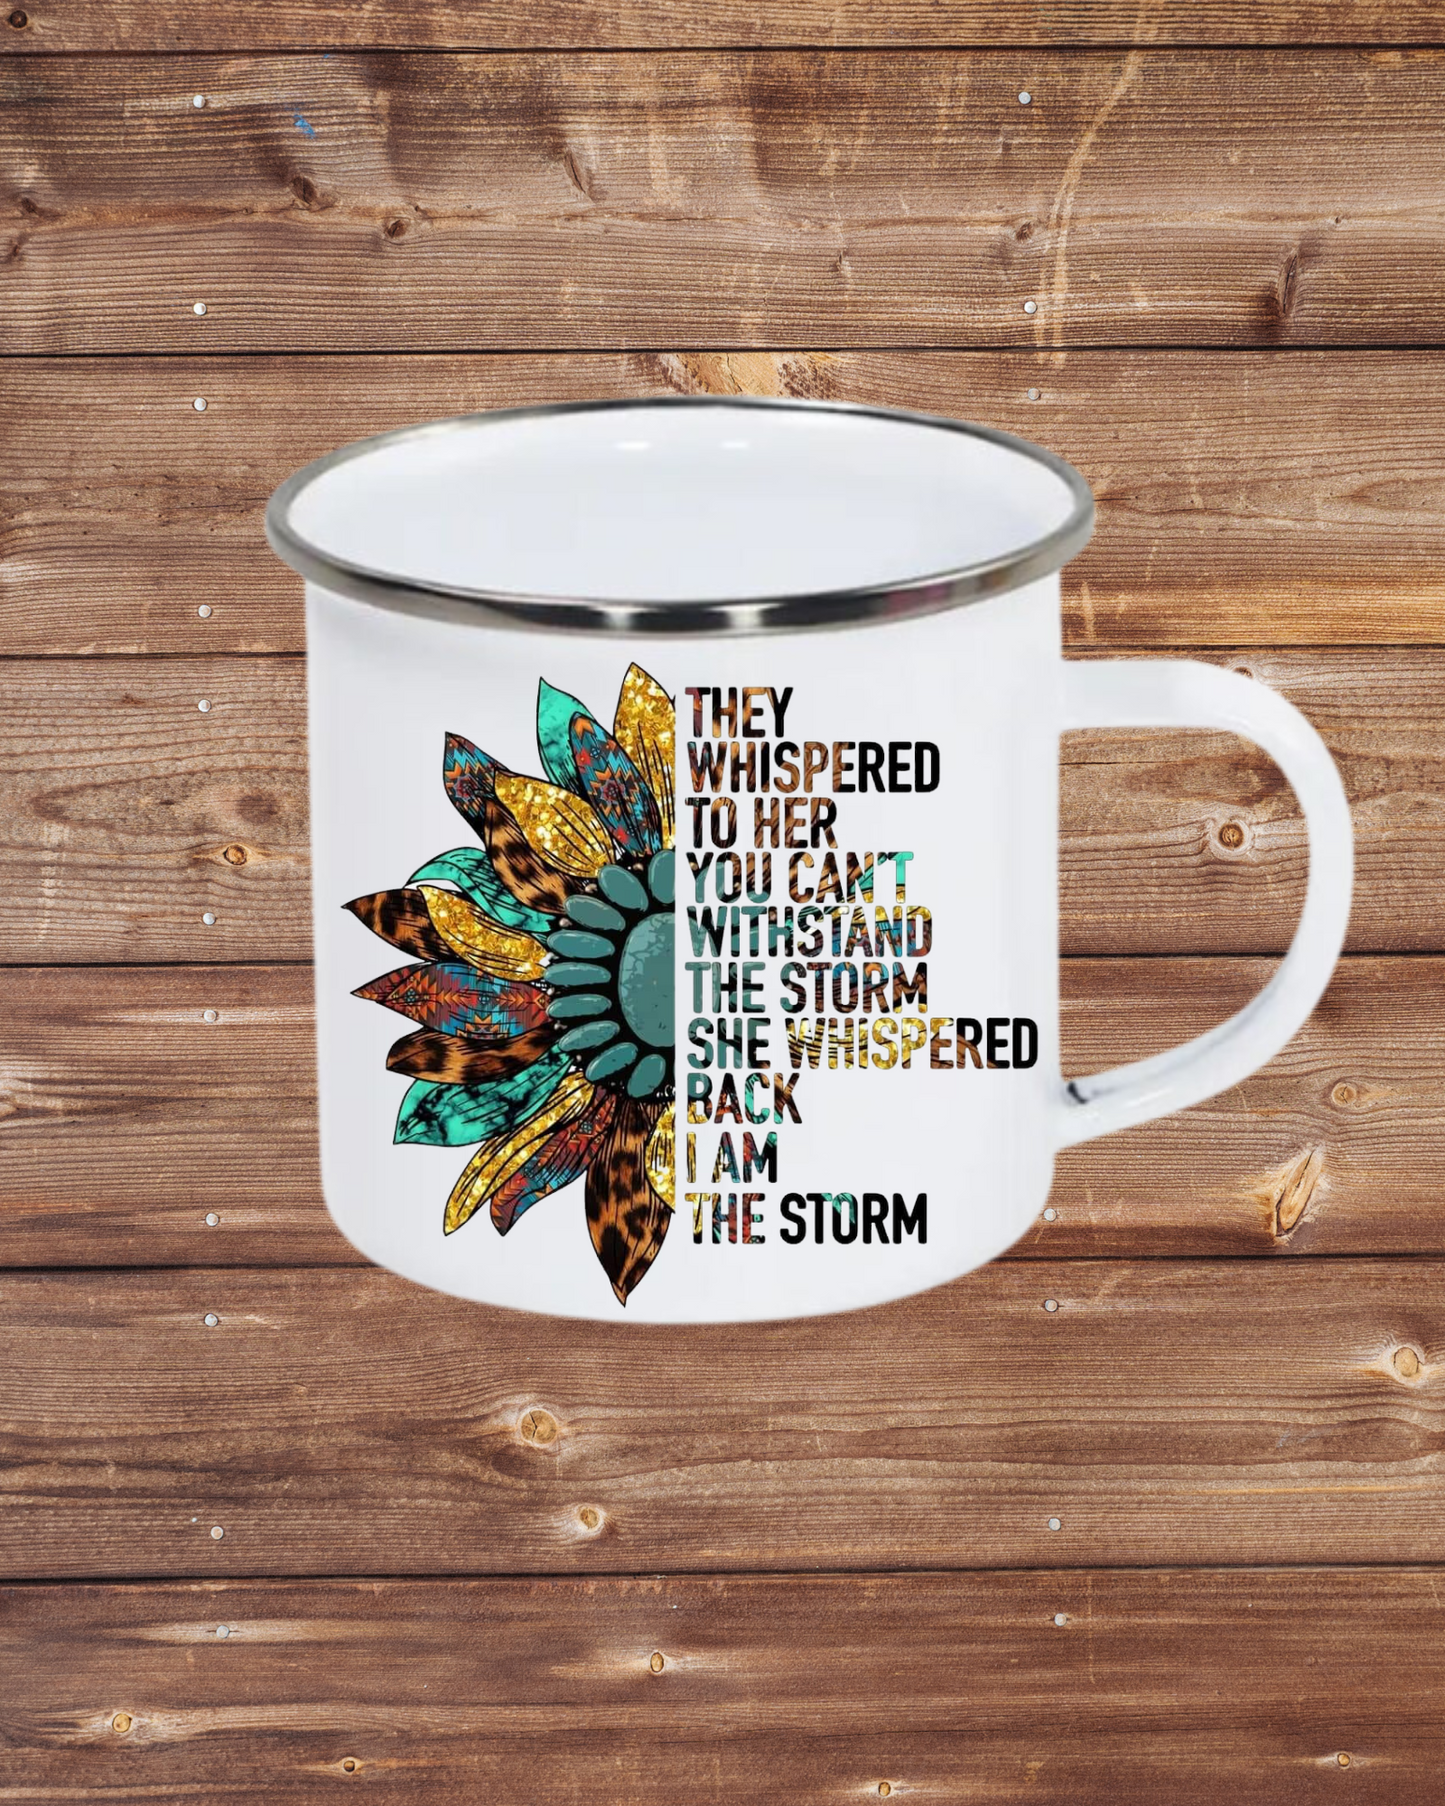 They Whispered To Her You Can't Withstand the Storm She Whispered Back I Am The Storm Mug